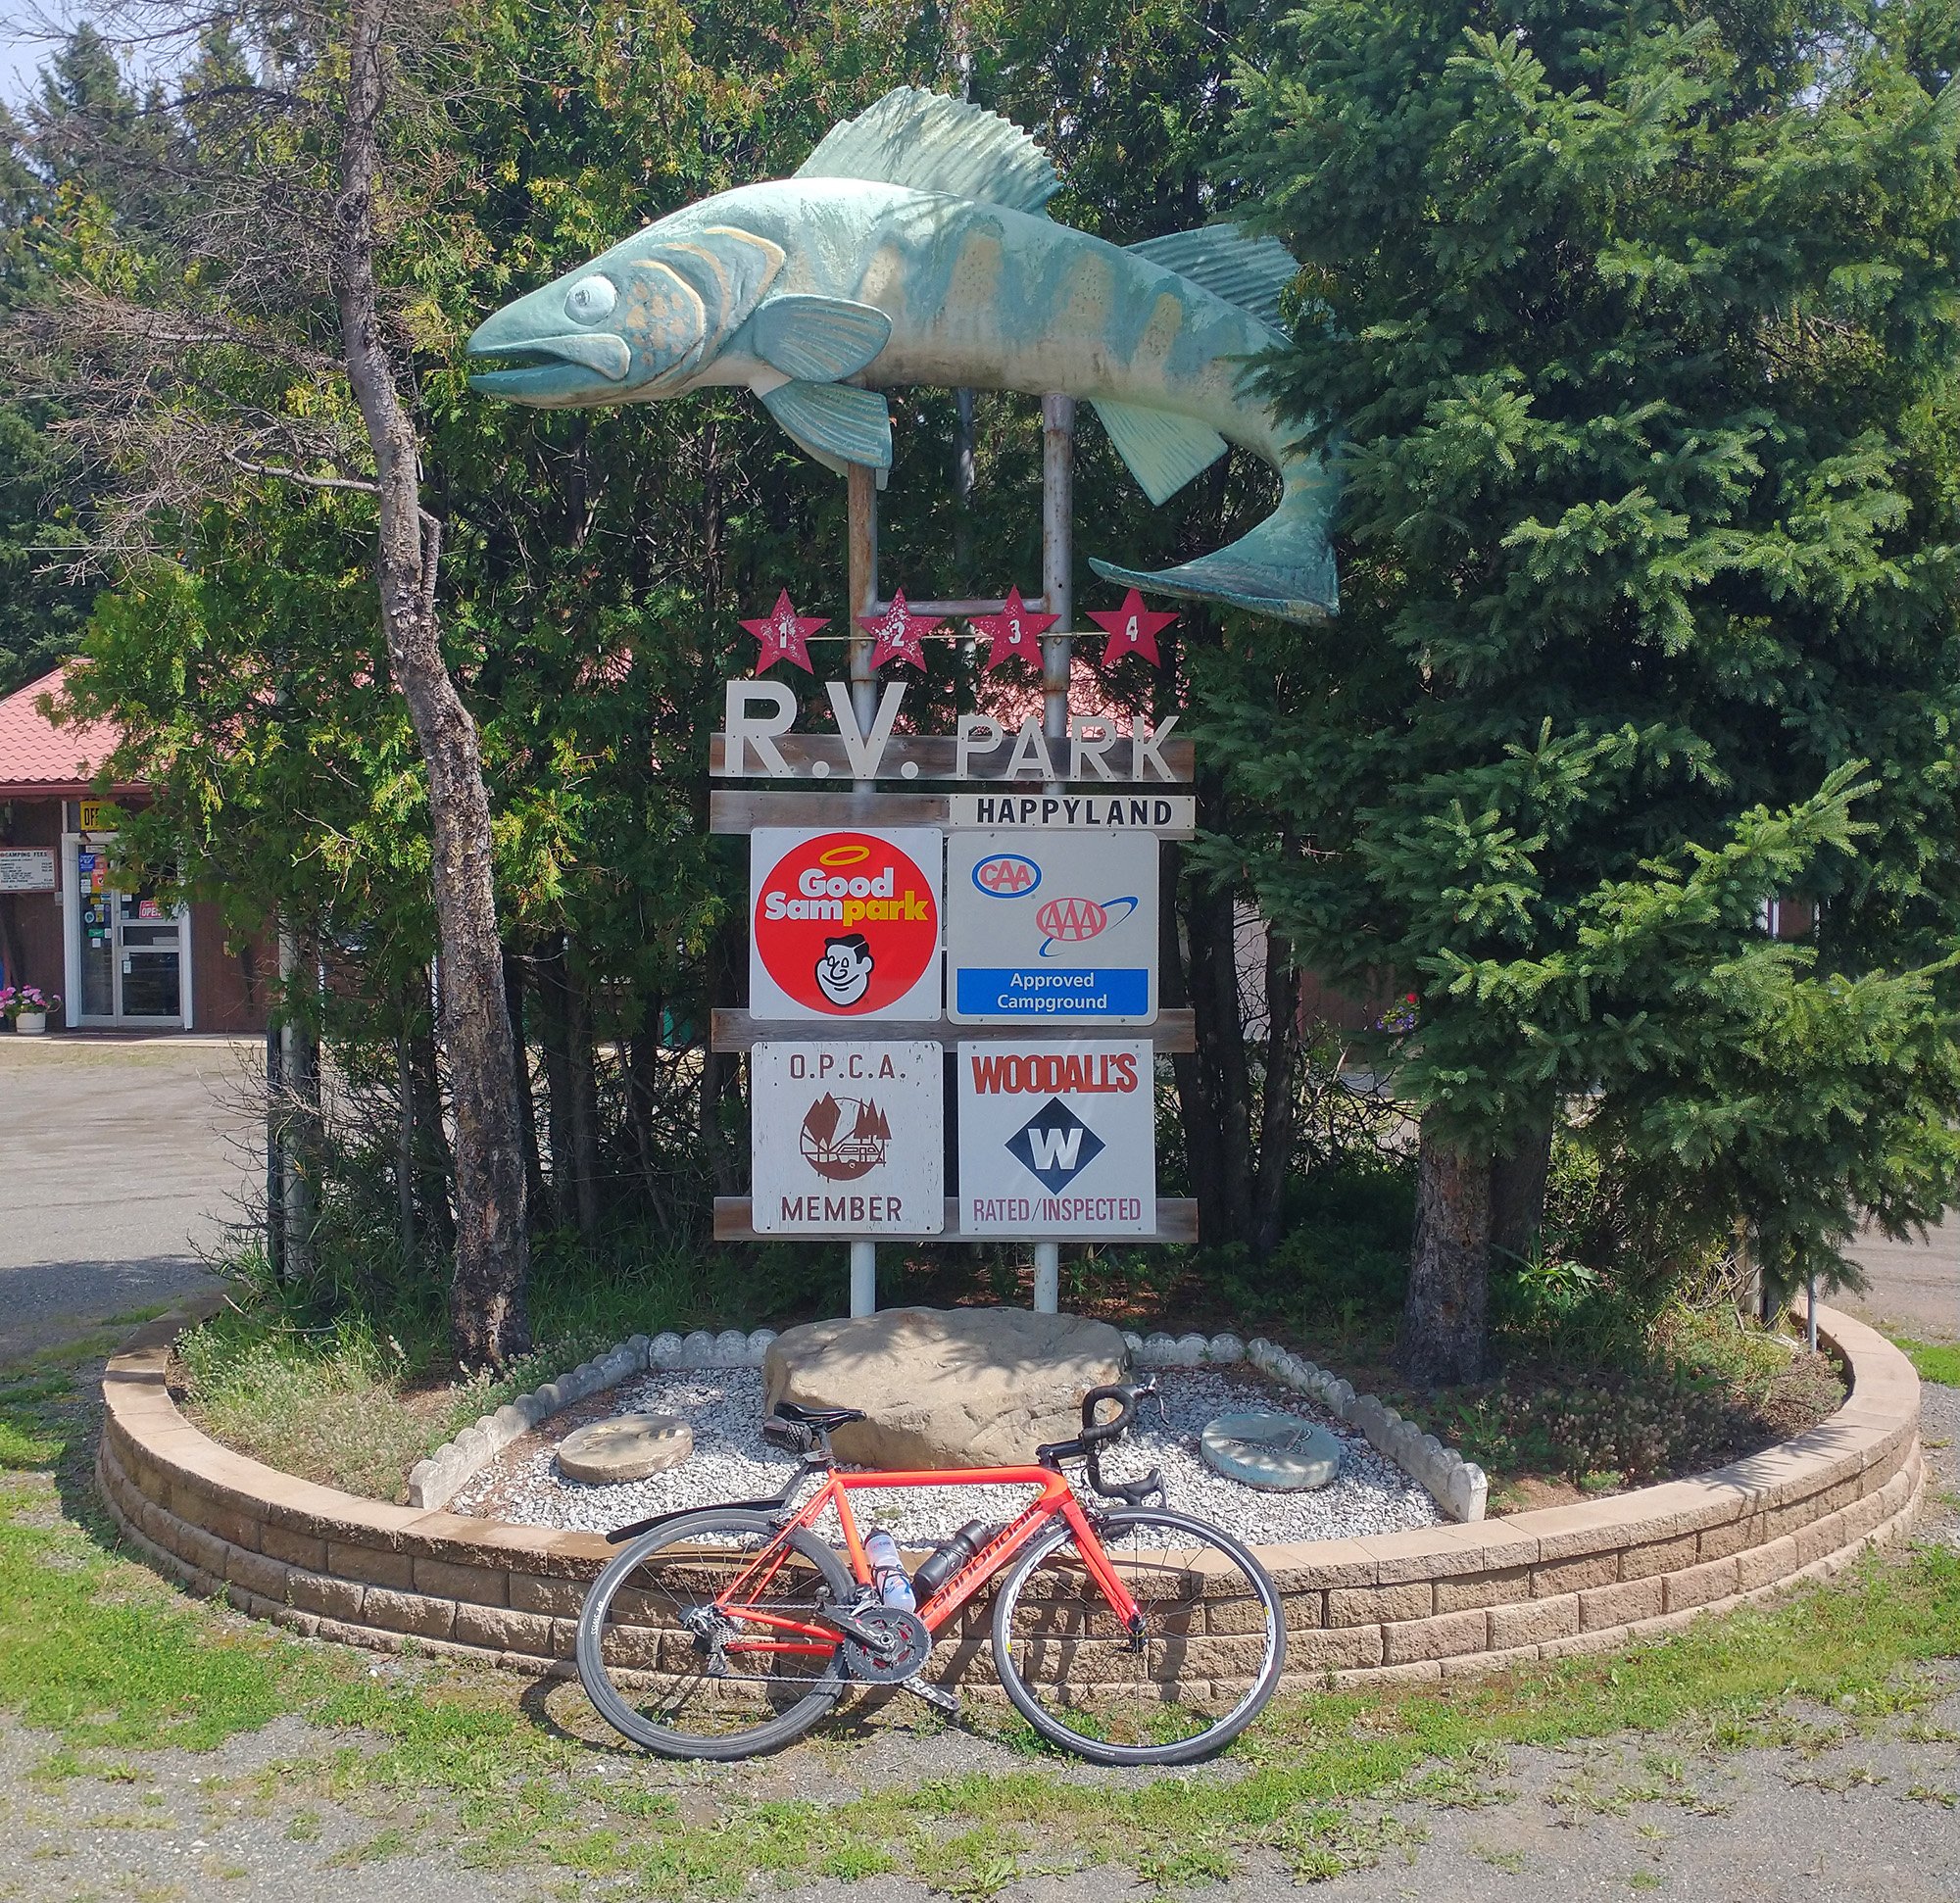 Revenge fish for now seeing the destroyed fish statue in Nipigon